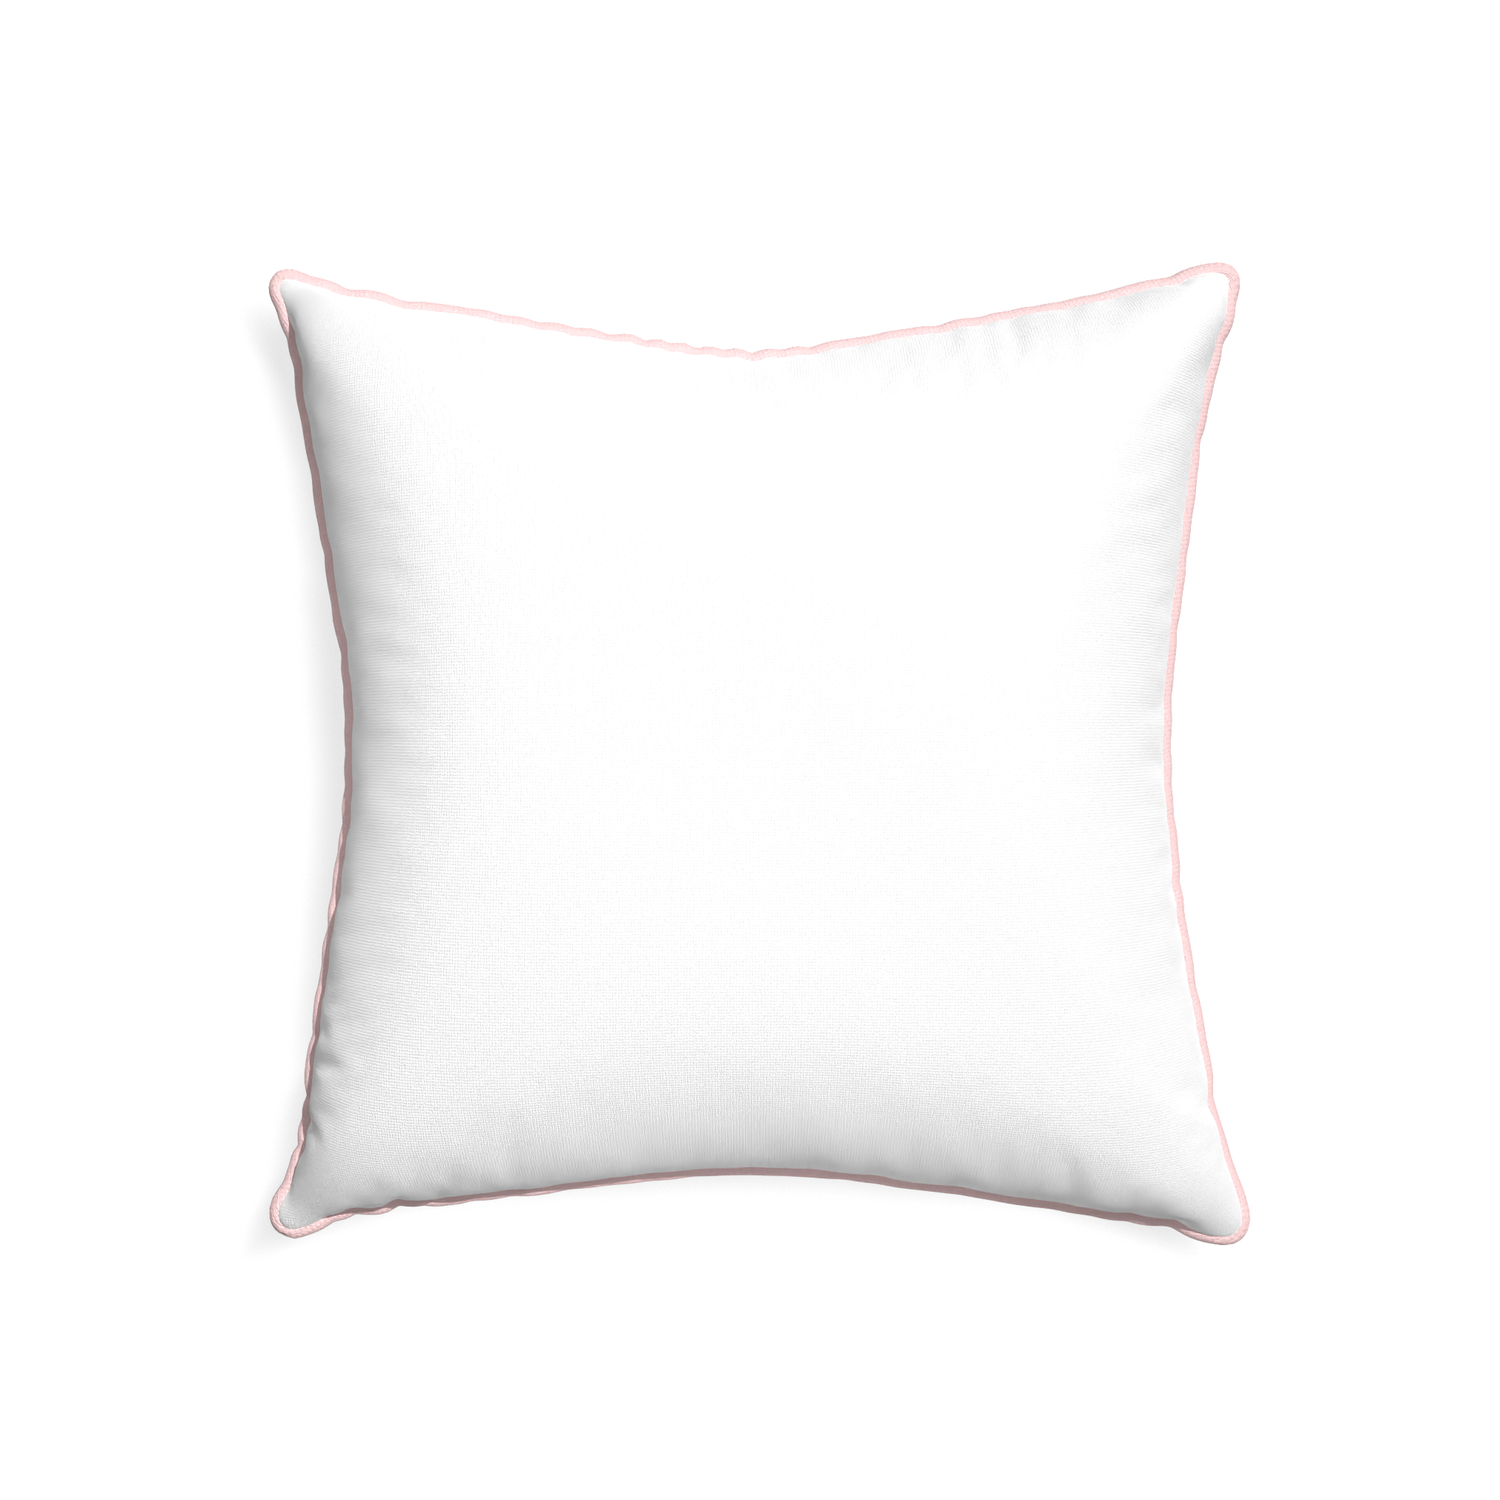 22-square snow custom white cottonpillow with petal piping on white background